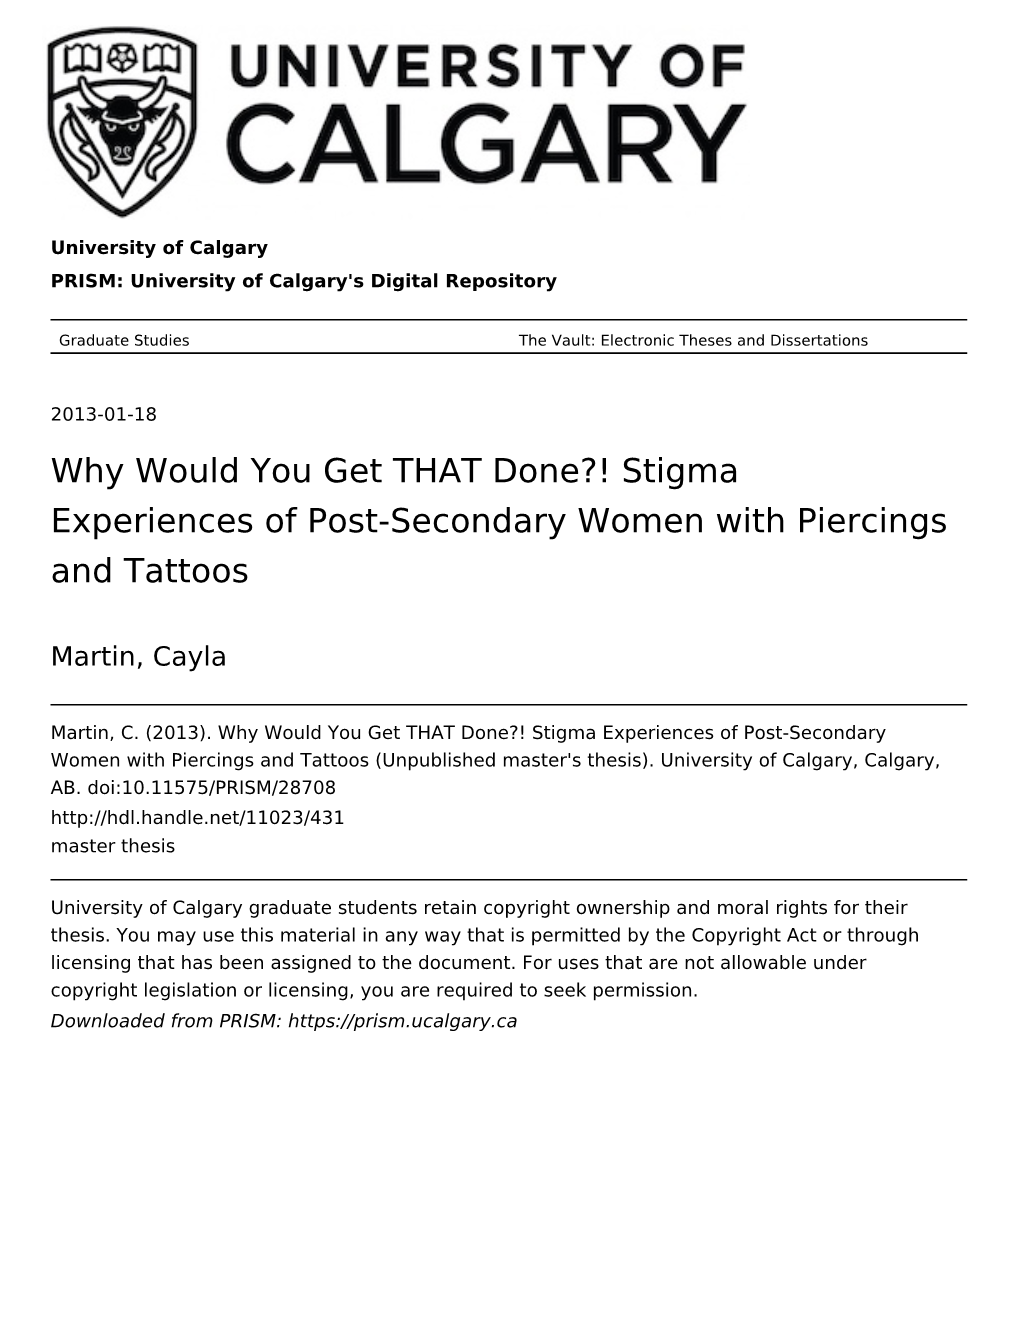 Stigma Experiences of Post-Secondary Women with Piercings and Tattoos